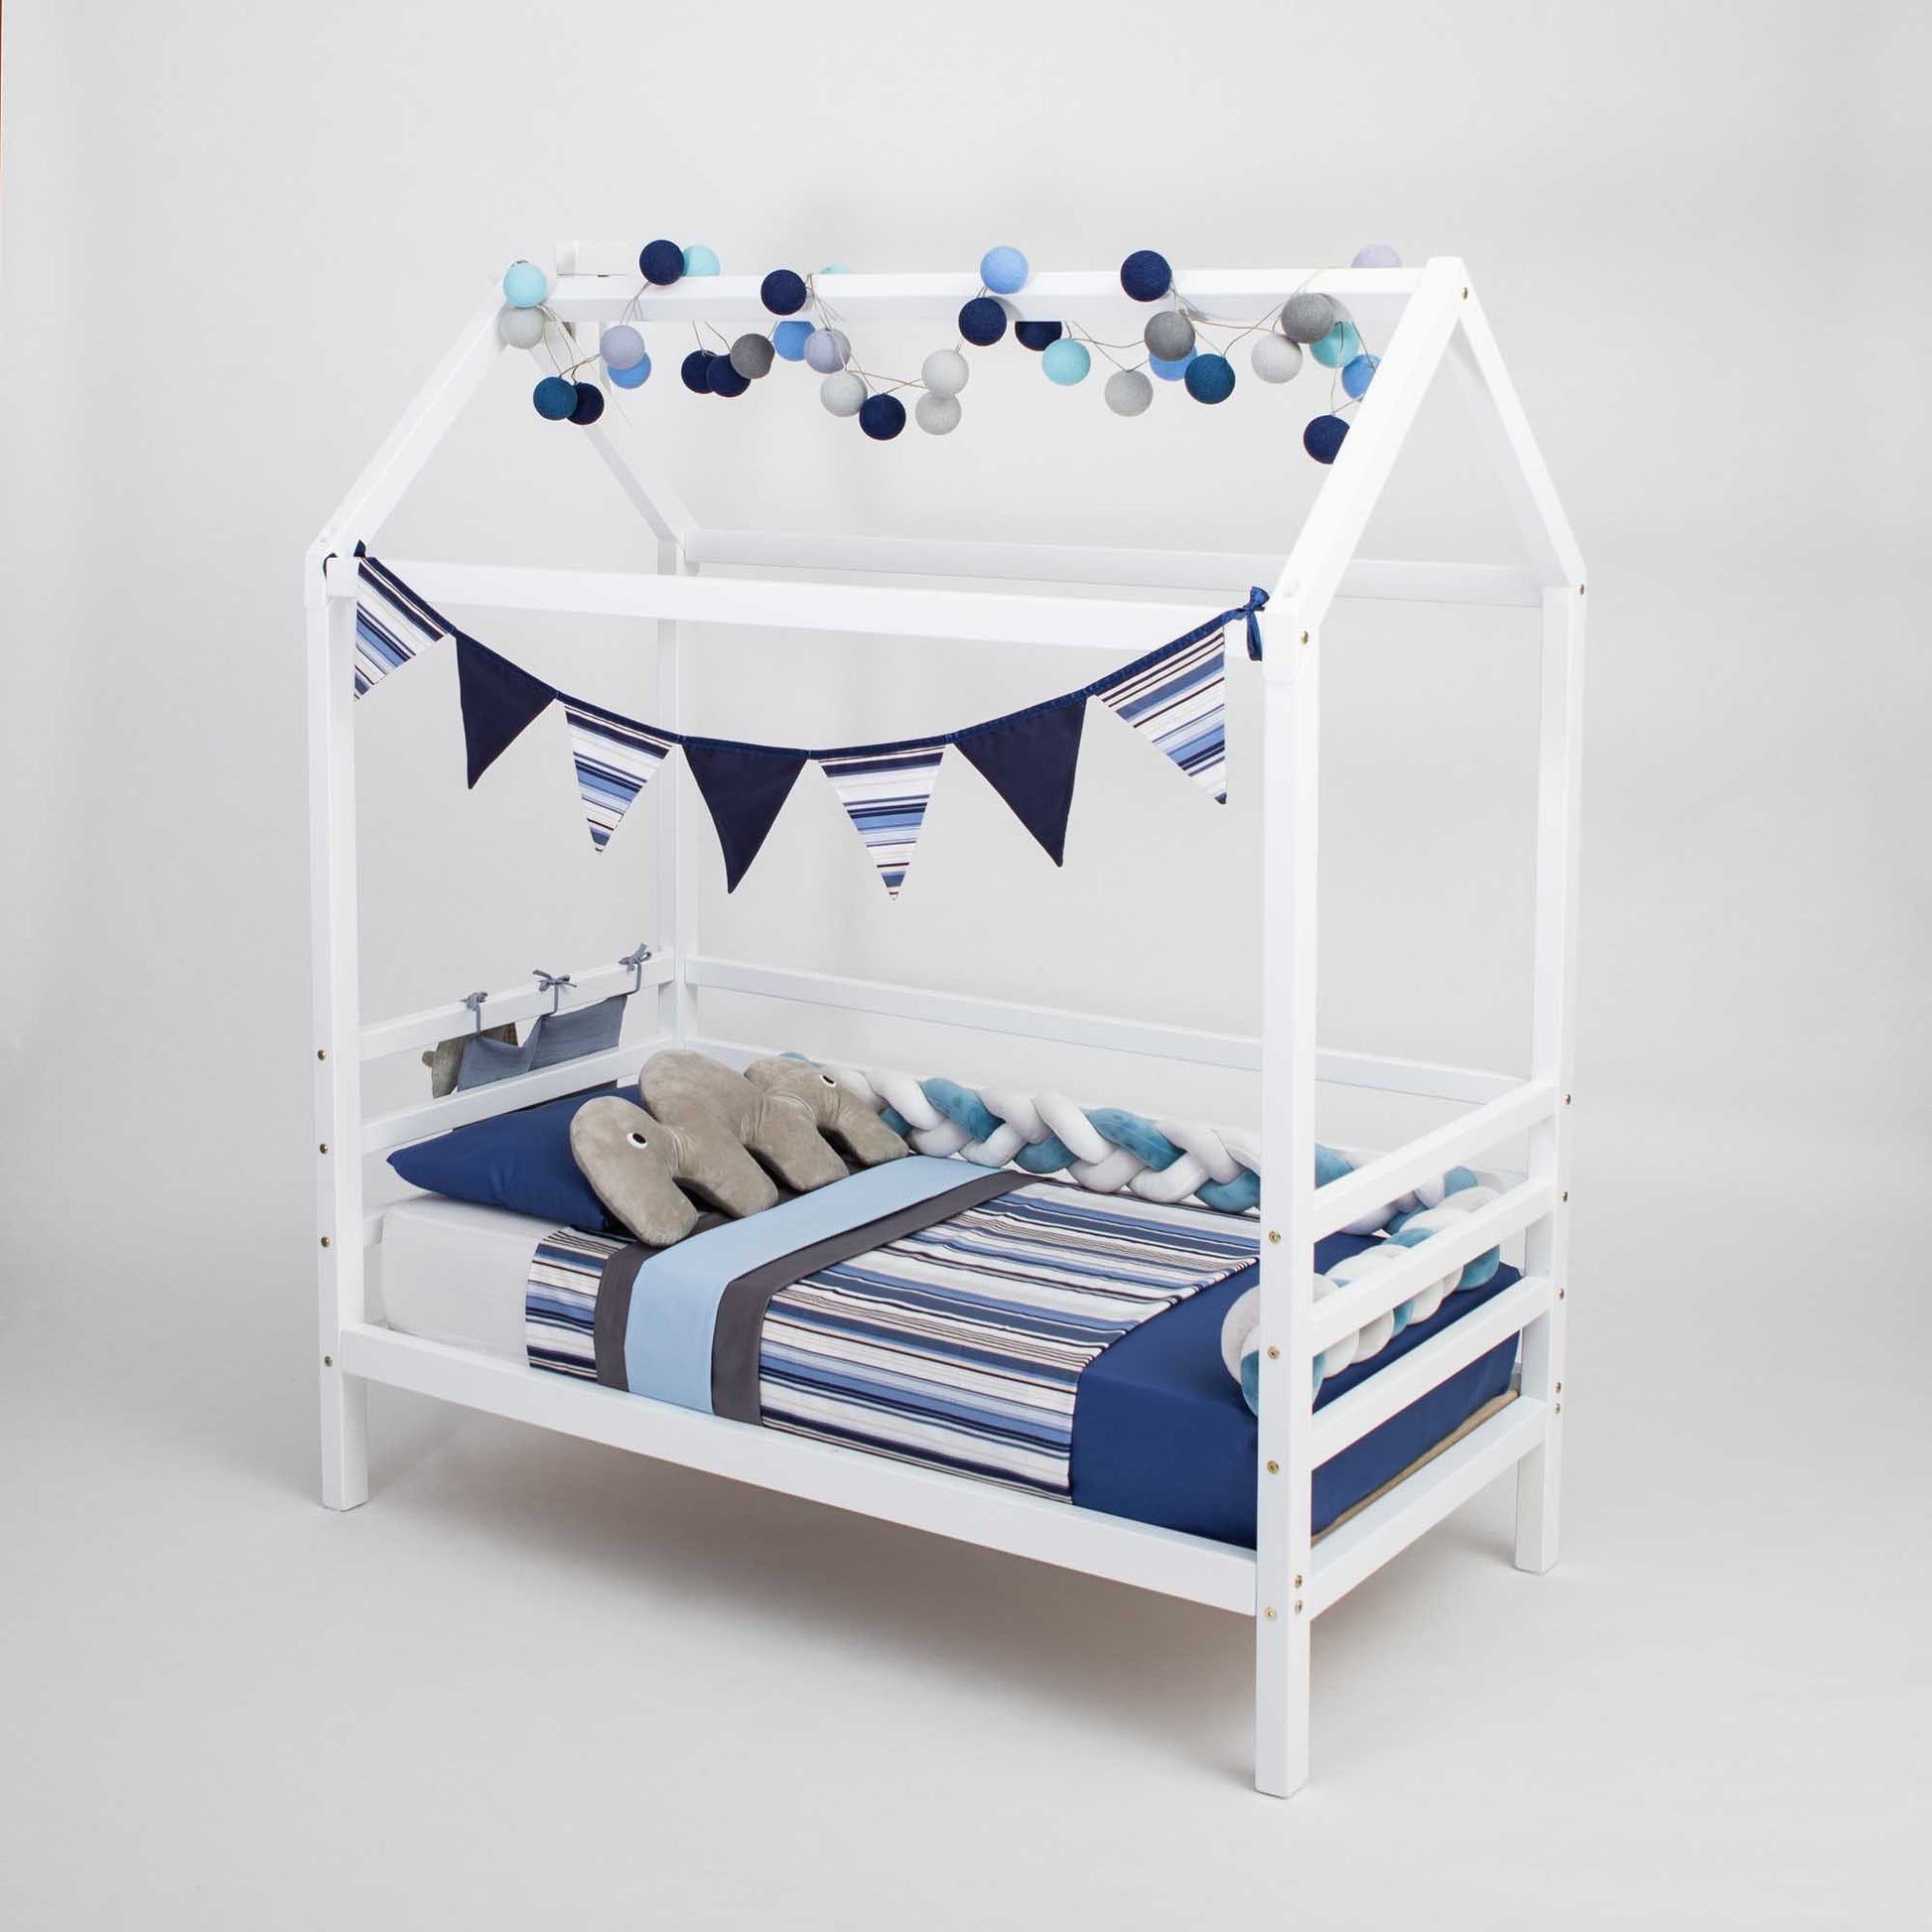 A blue and white striped children's house bed on legs with 3-sided rails and bunting.